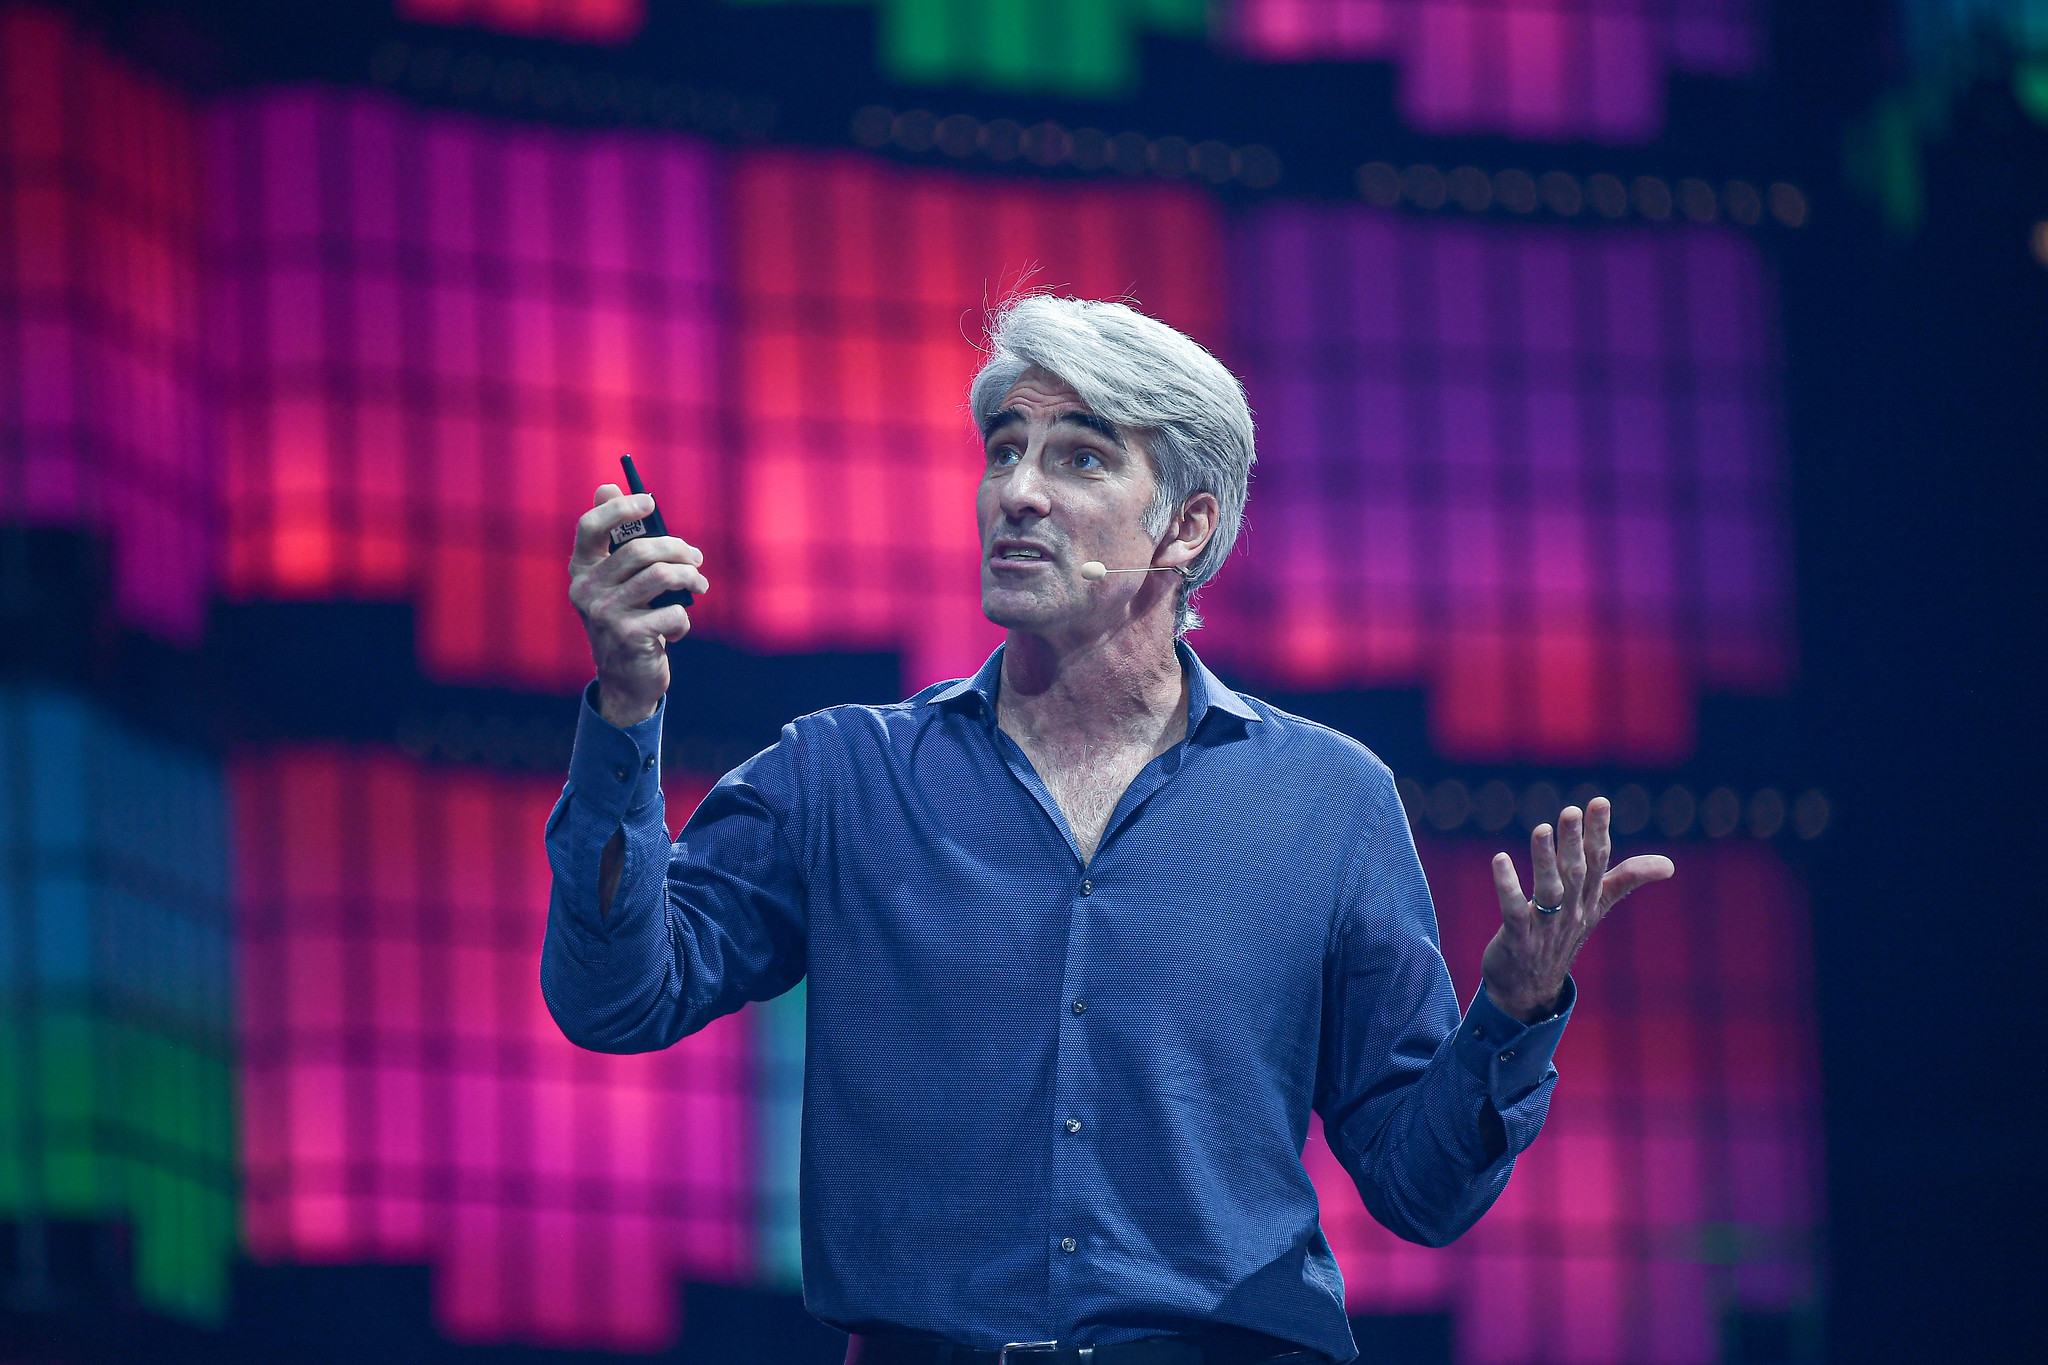 Craig Federighi, Senior Vice President of Software Engineering at Apple, on the Centre Stage, during day two of Web Summit 2021